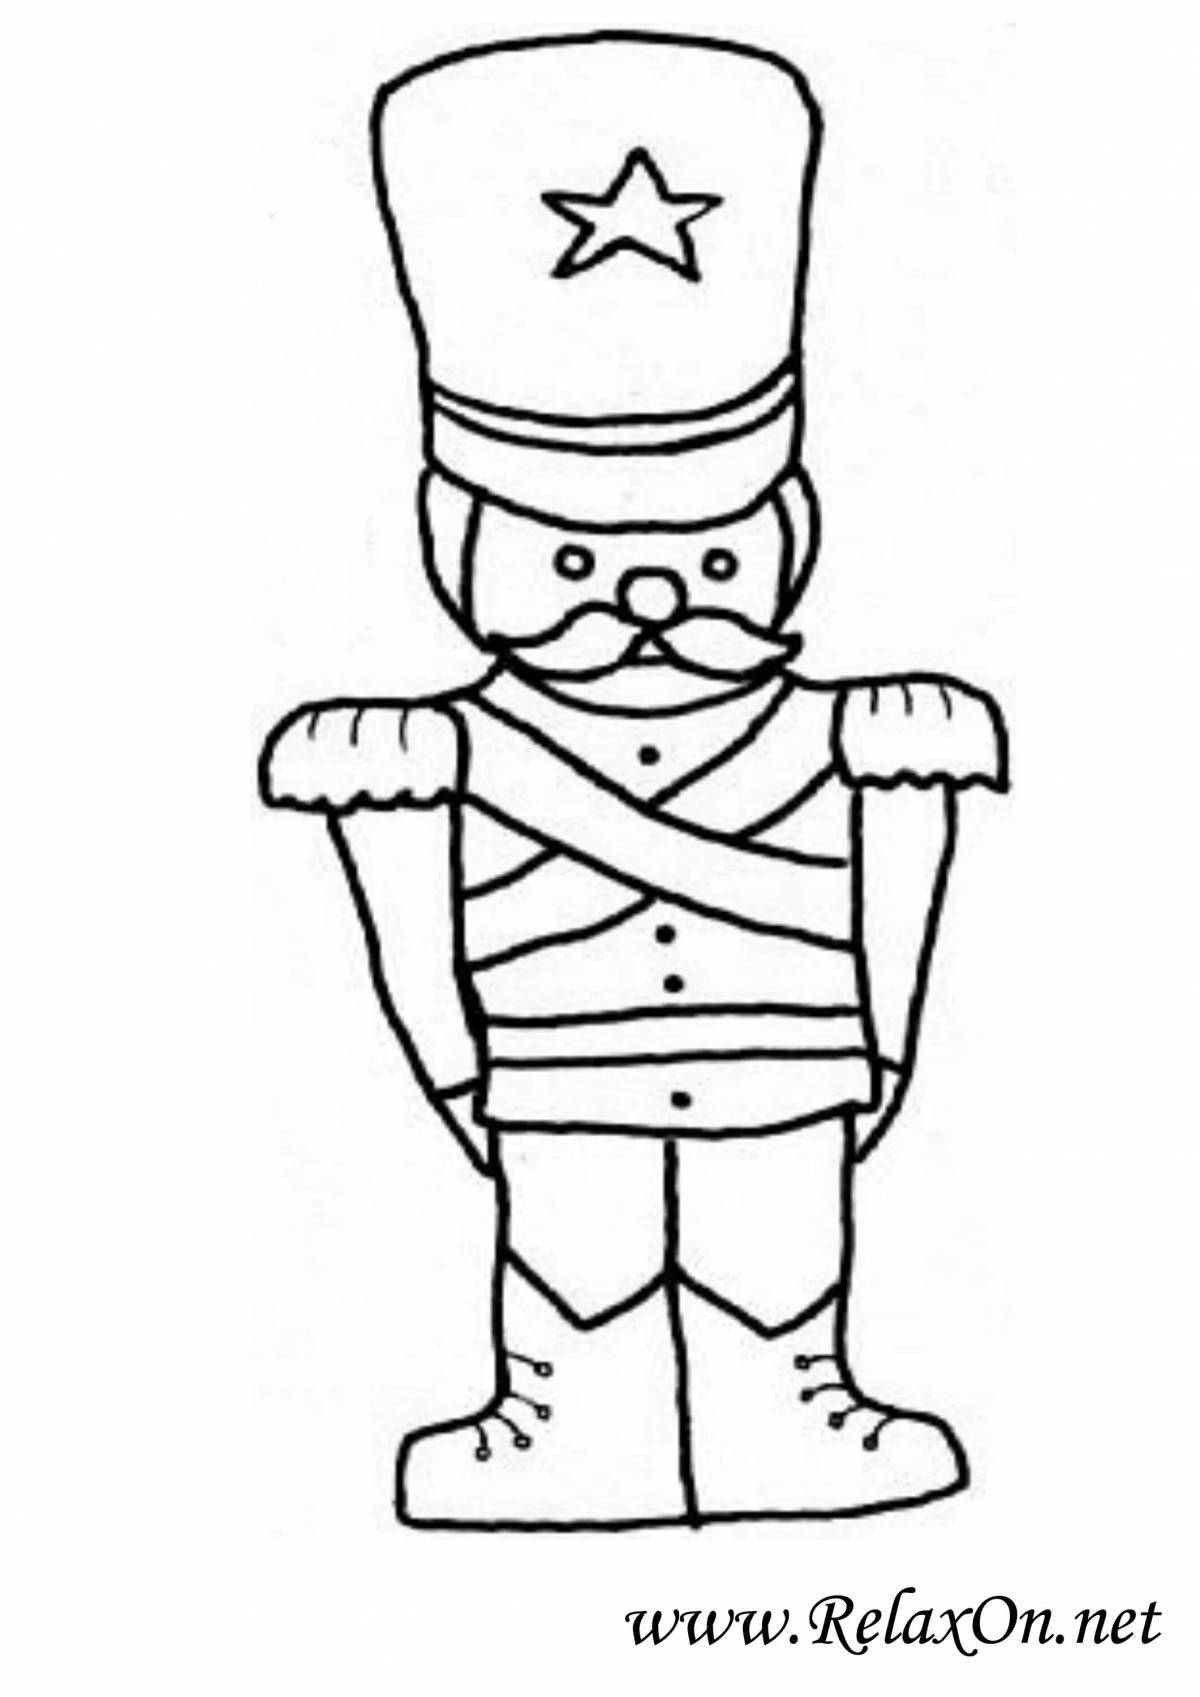 Tempting tin soldiers coloring pages